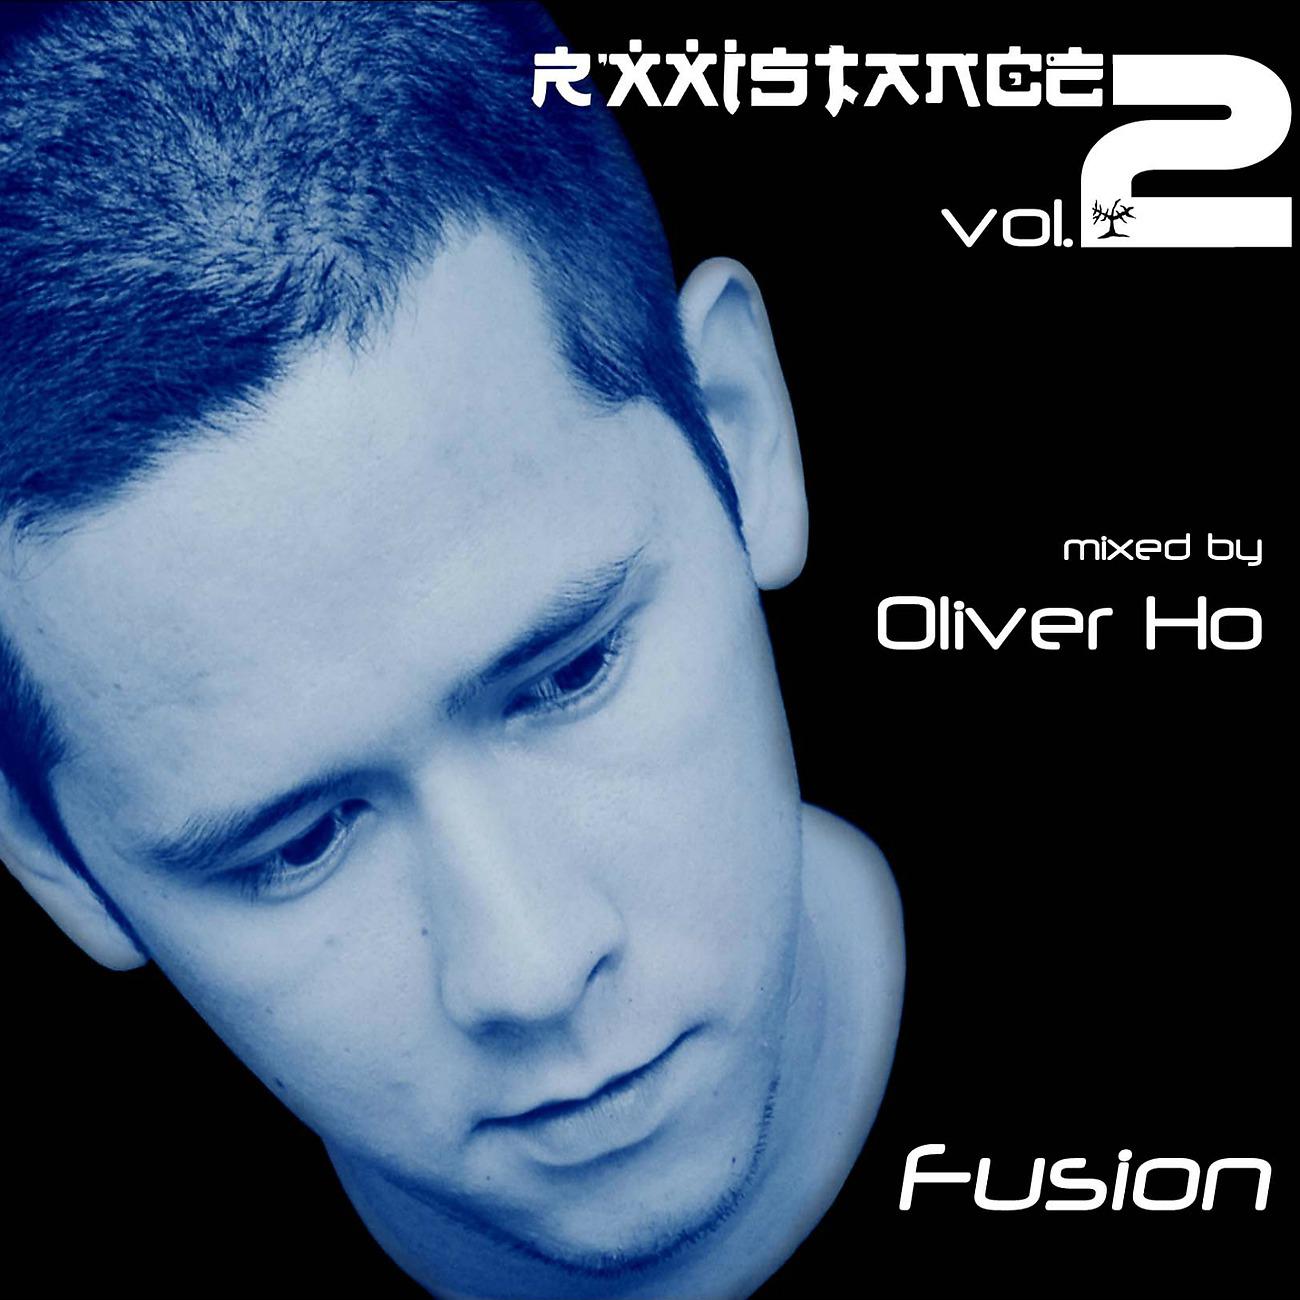 Постер альбома Rxxistance Vol. 2: Fusion, Mixed by Oliver Ho